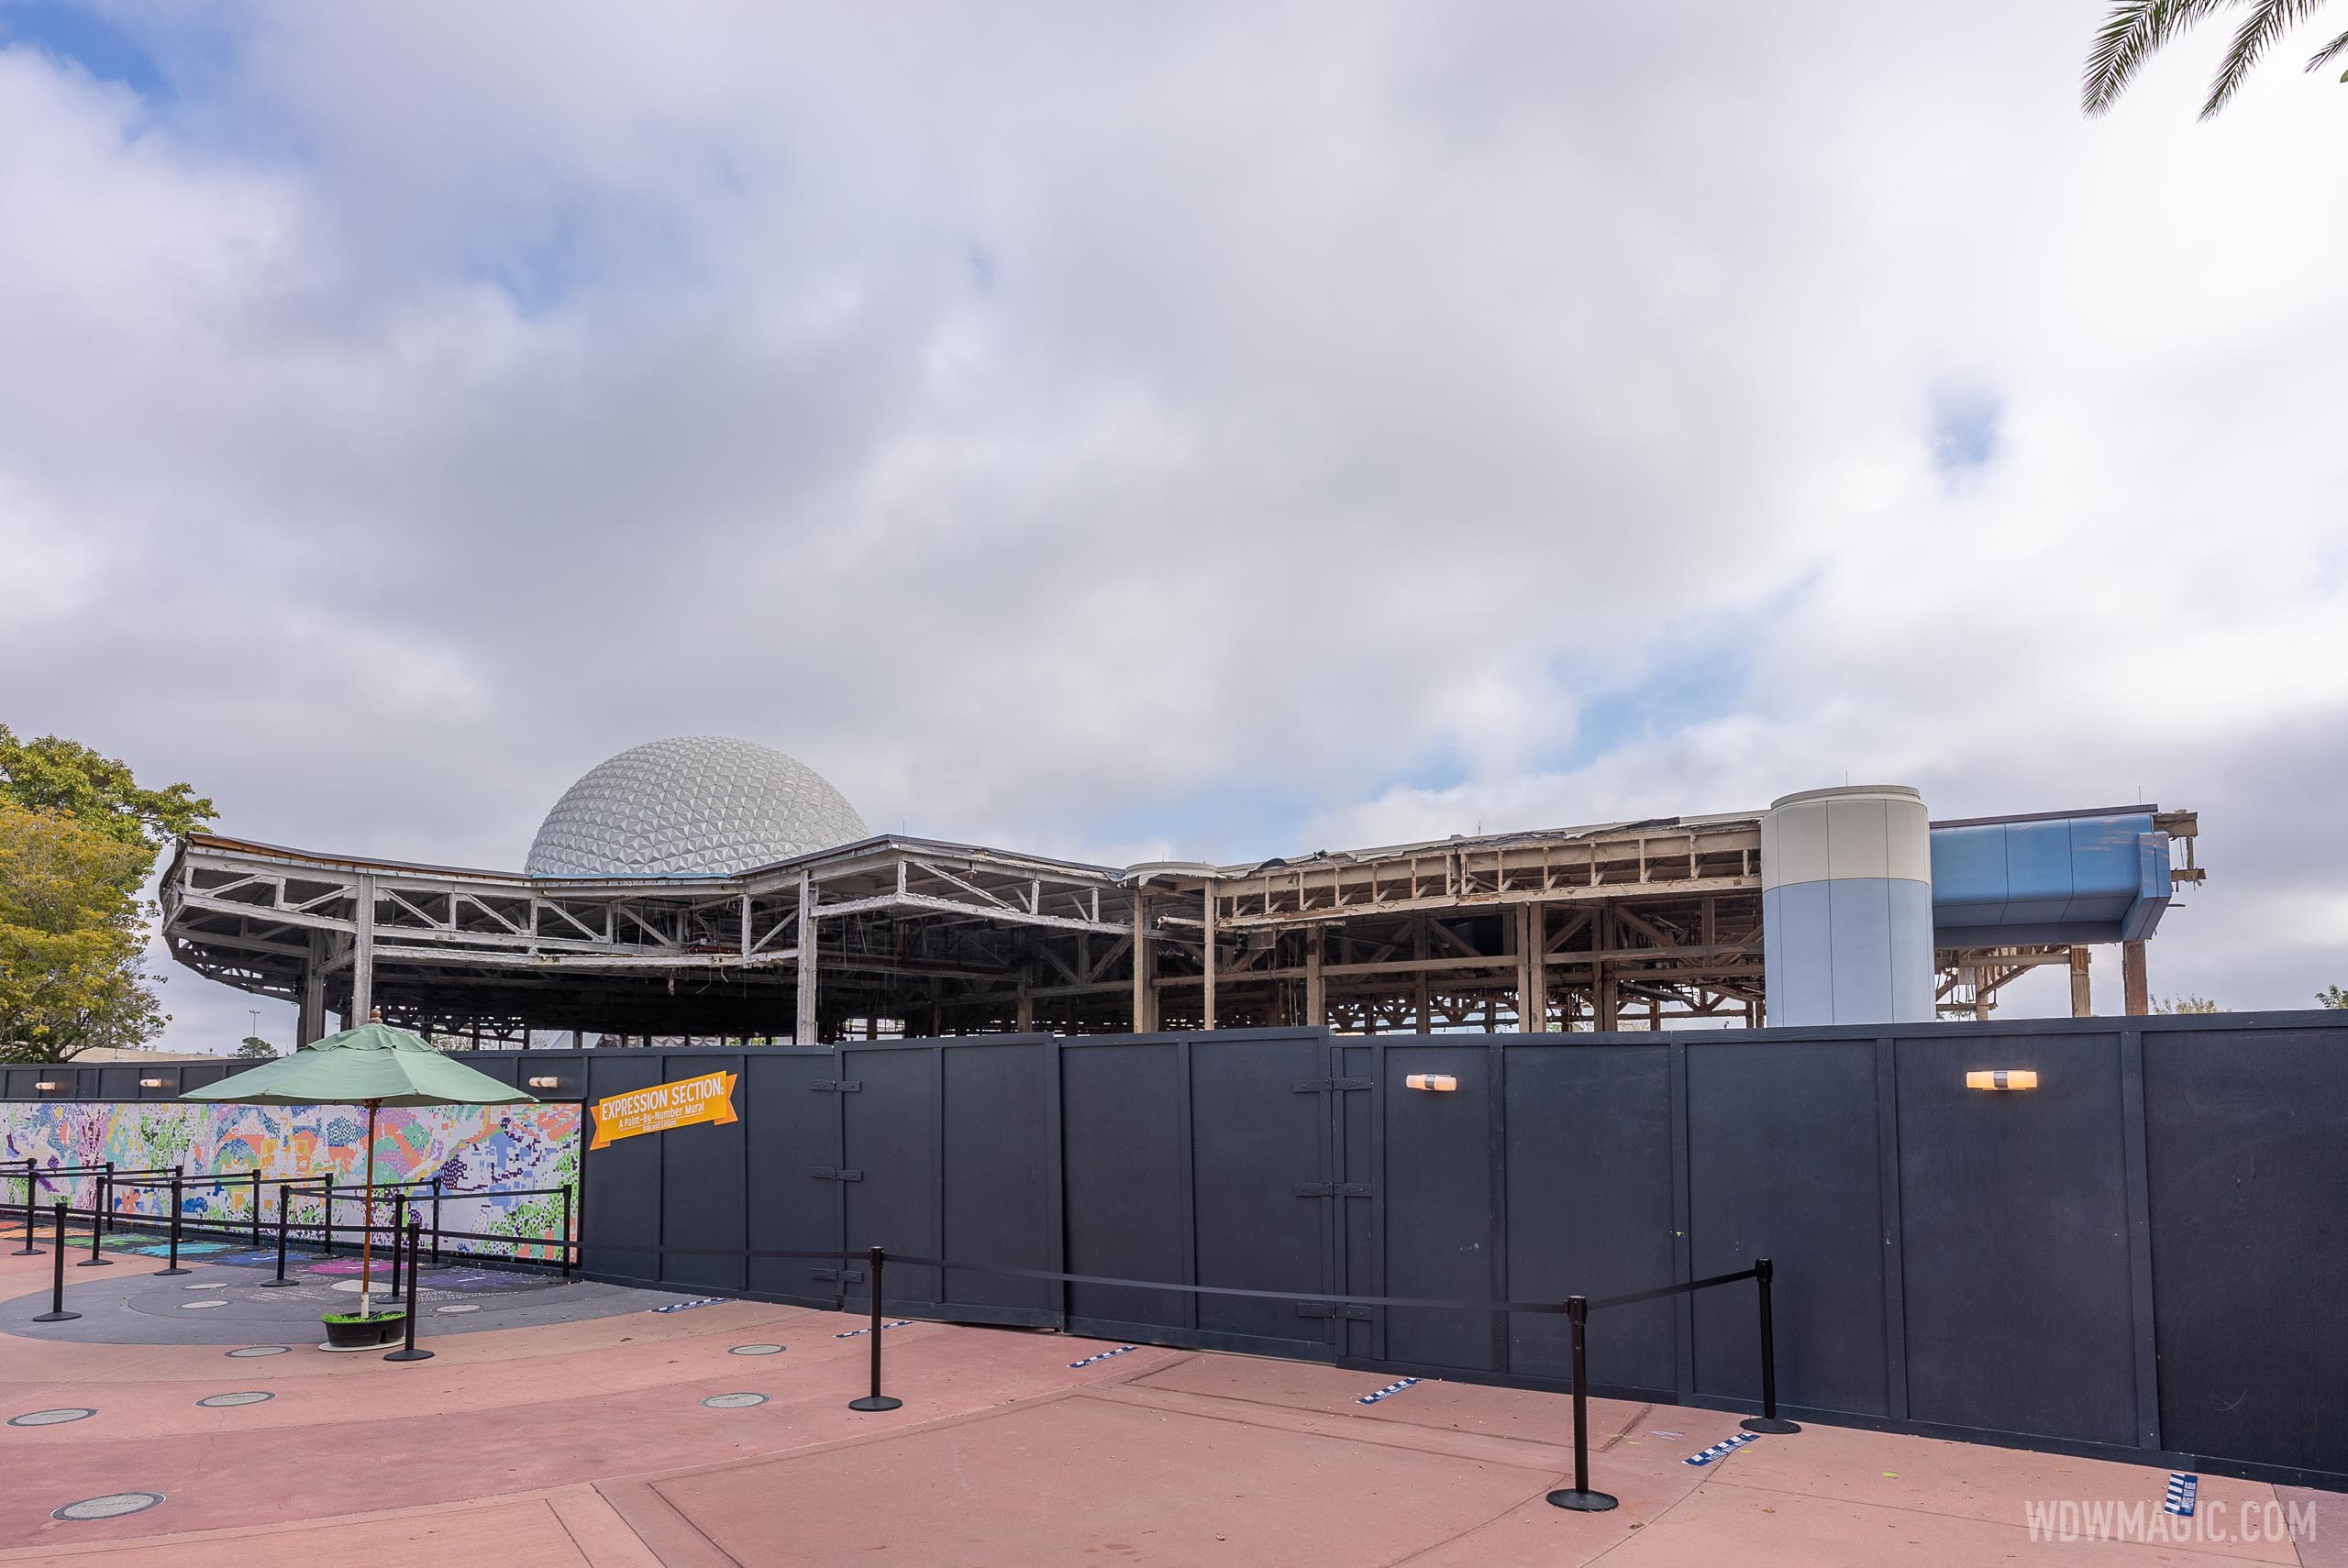 EPCOT Innoventions West demolition - January 26 2021 - Photo 8 of 10